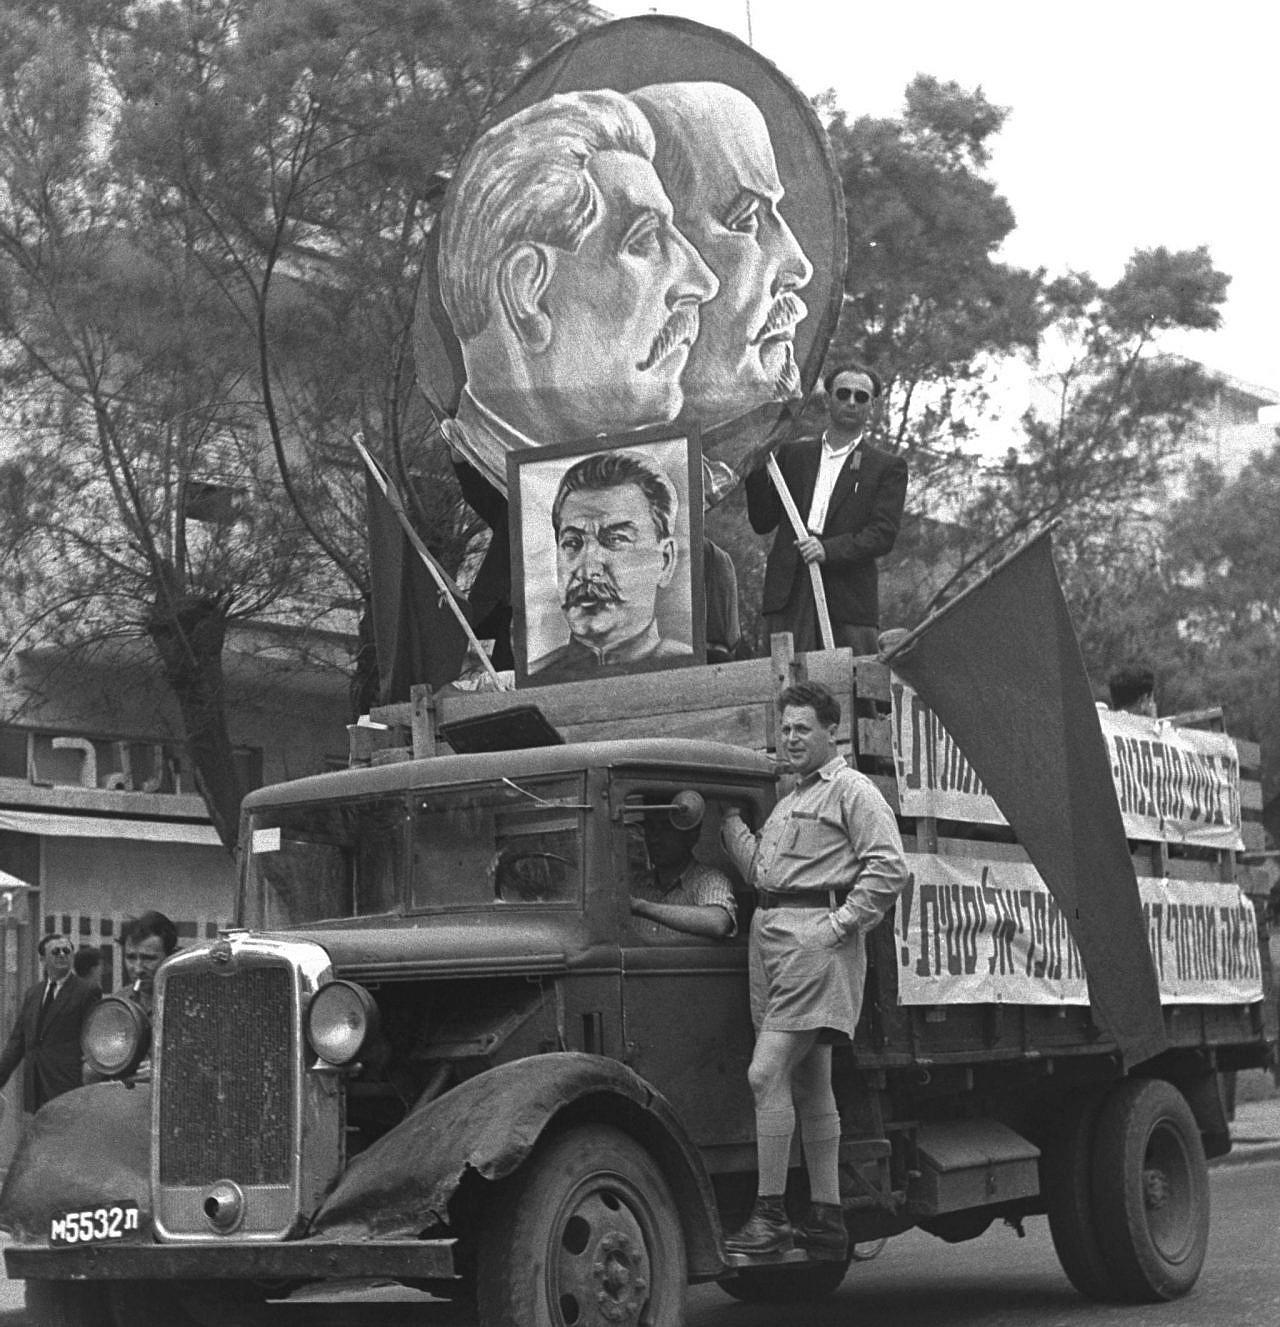 A truck carrying images of Vladimir Lenin and Joseph Stalin during the May Day Parade in Tel Aviv, May 1, 1949. (Hans Pin/GPO)